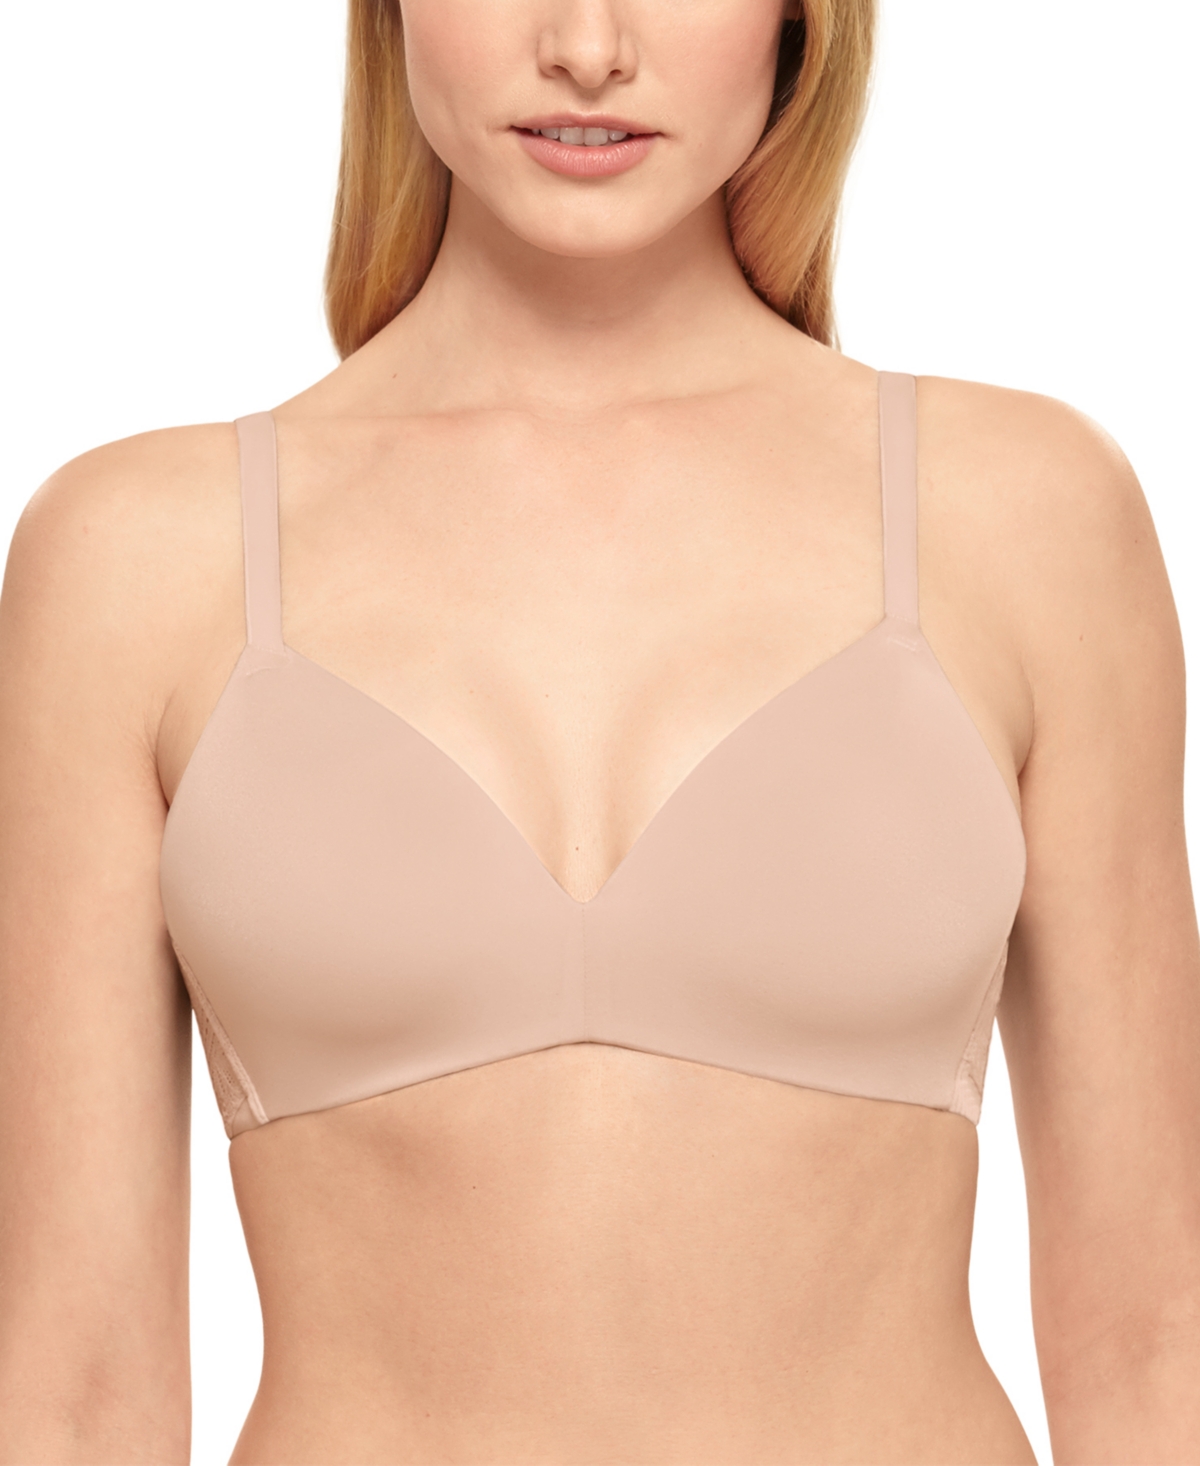 by Wacoal Women's Future Foundation With Lace Wirefree Bra 952253 - Rose Smoke